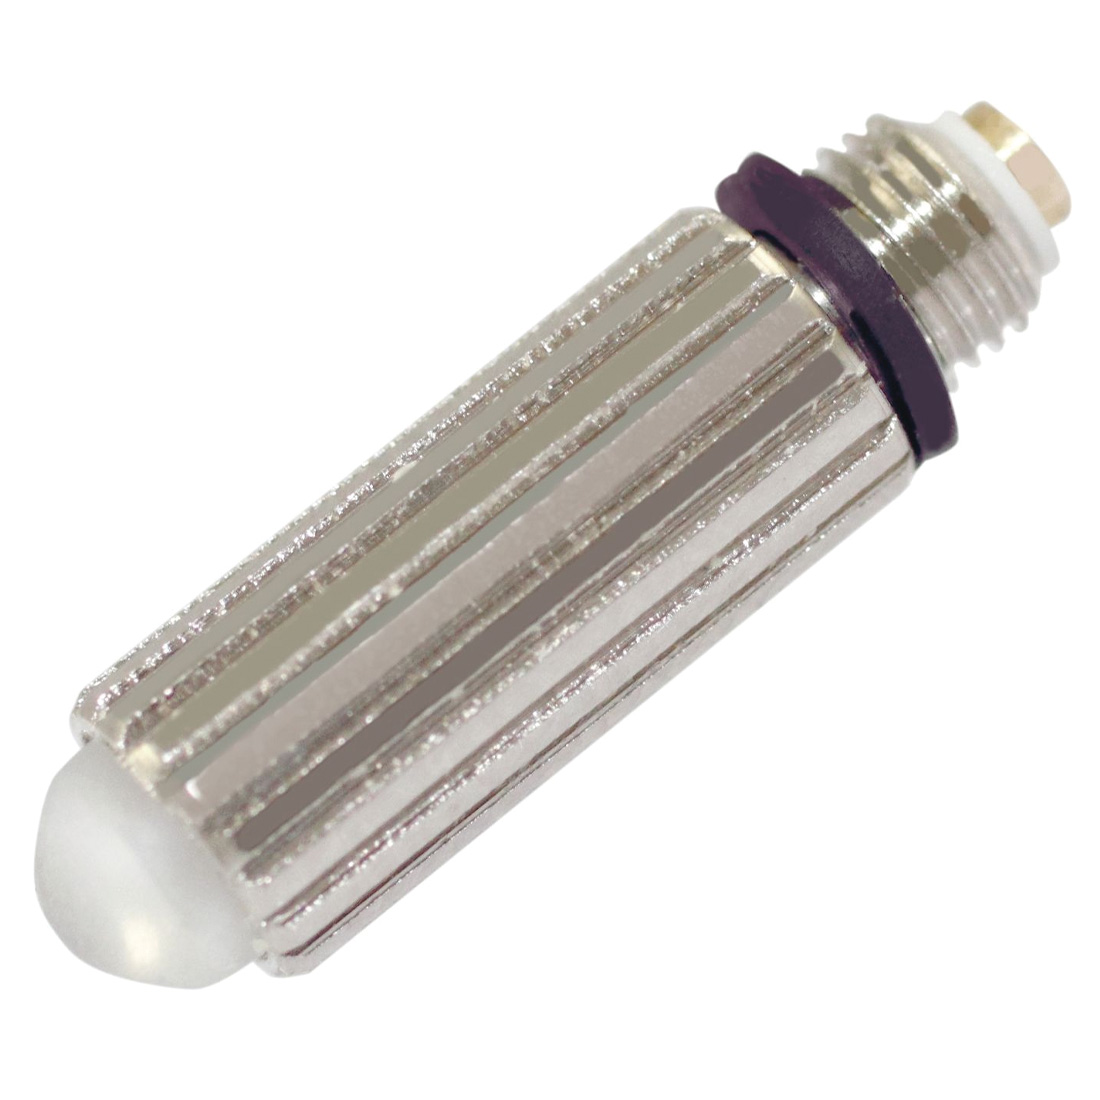 Standard Kryton Replacement Bulb (for use with Standard Blades)